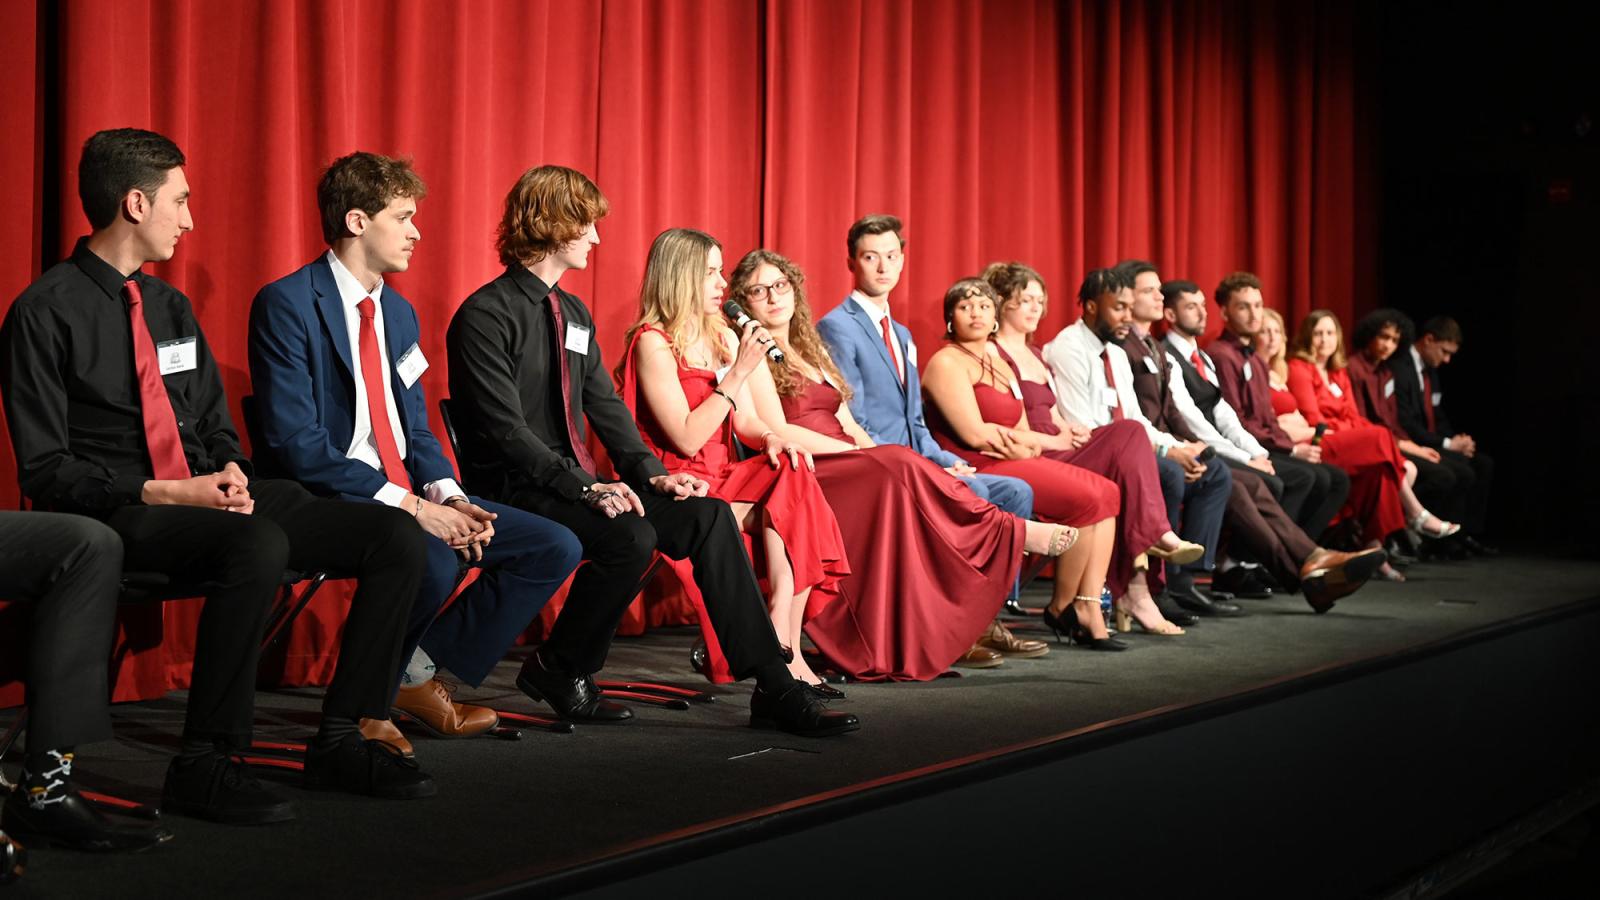 Pace University students on stage at the Jacob Burns Film Center for a Q&A at the premier of The Cooper: Crafting the Soul of the Cask